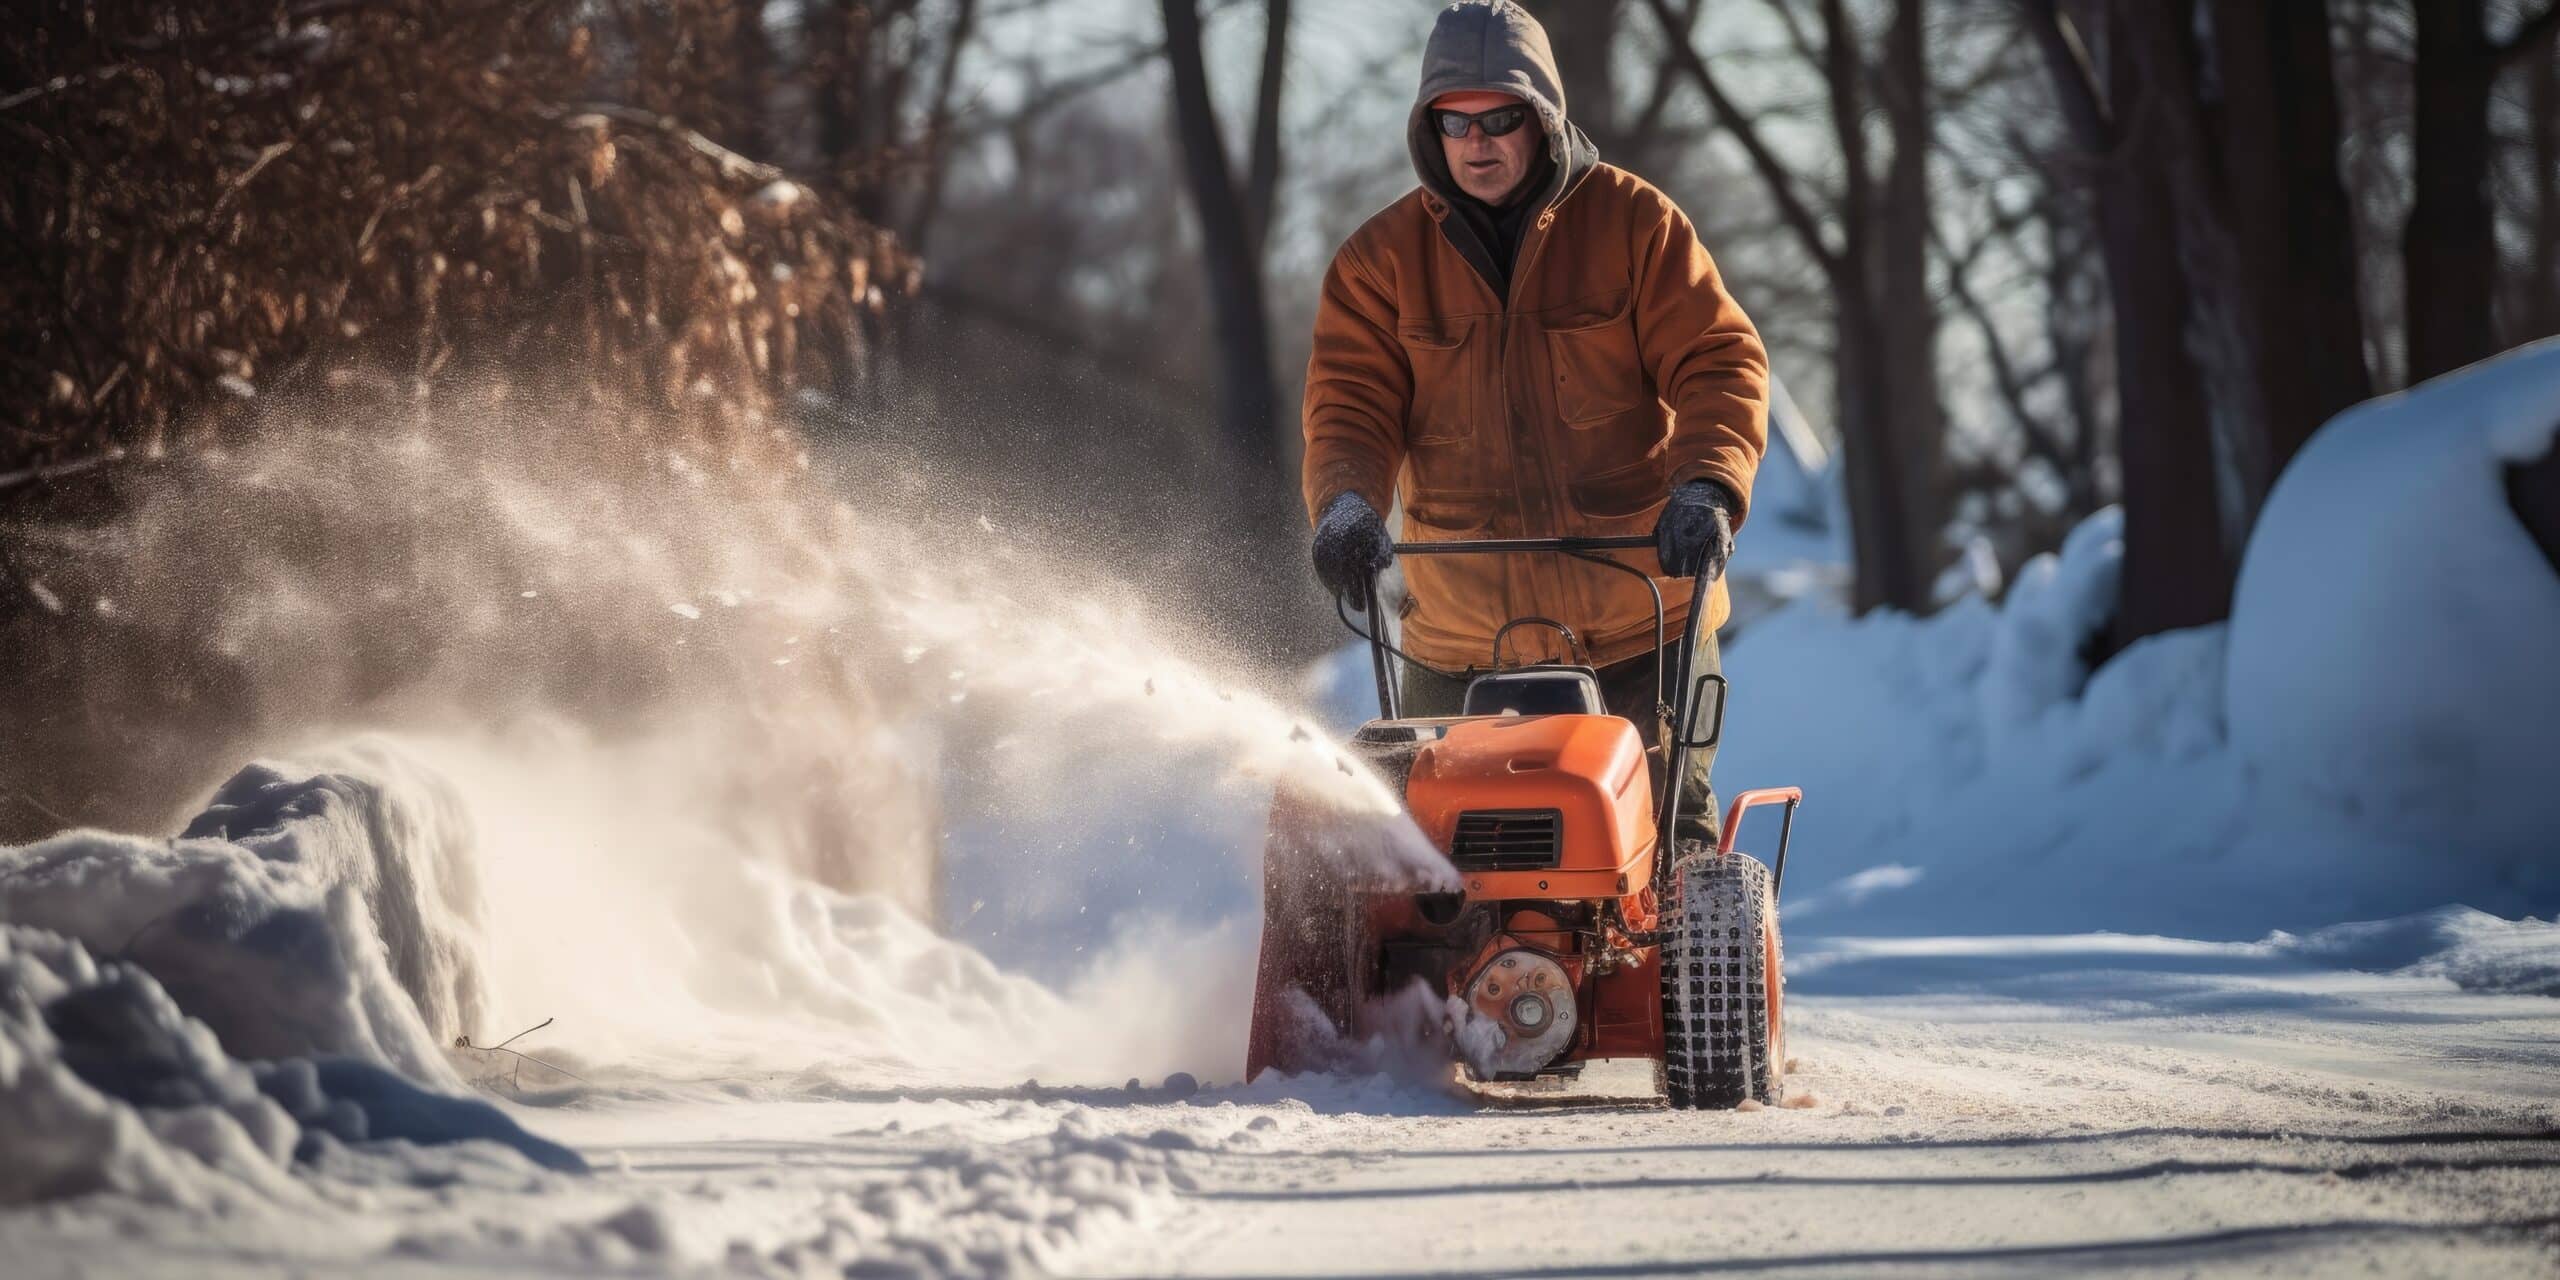 www.appr.com : Who accepts old snow blowers for disposal or recycling?